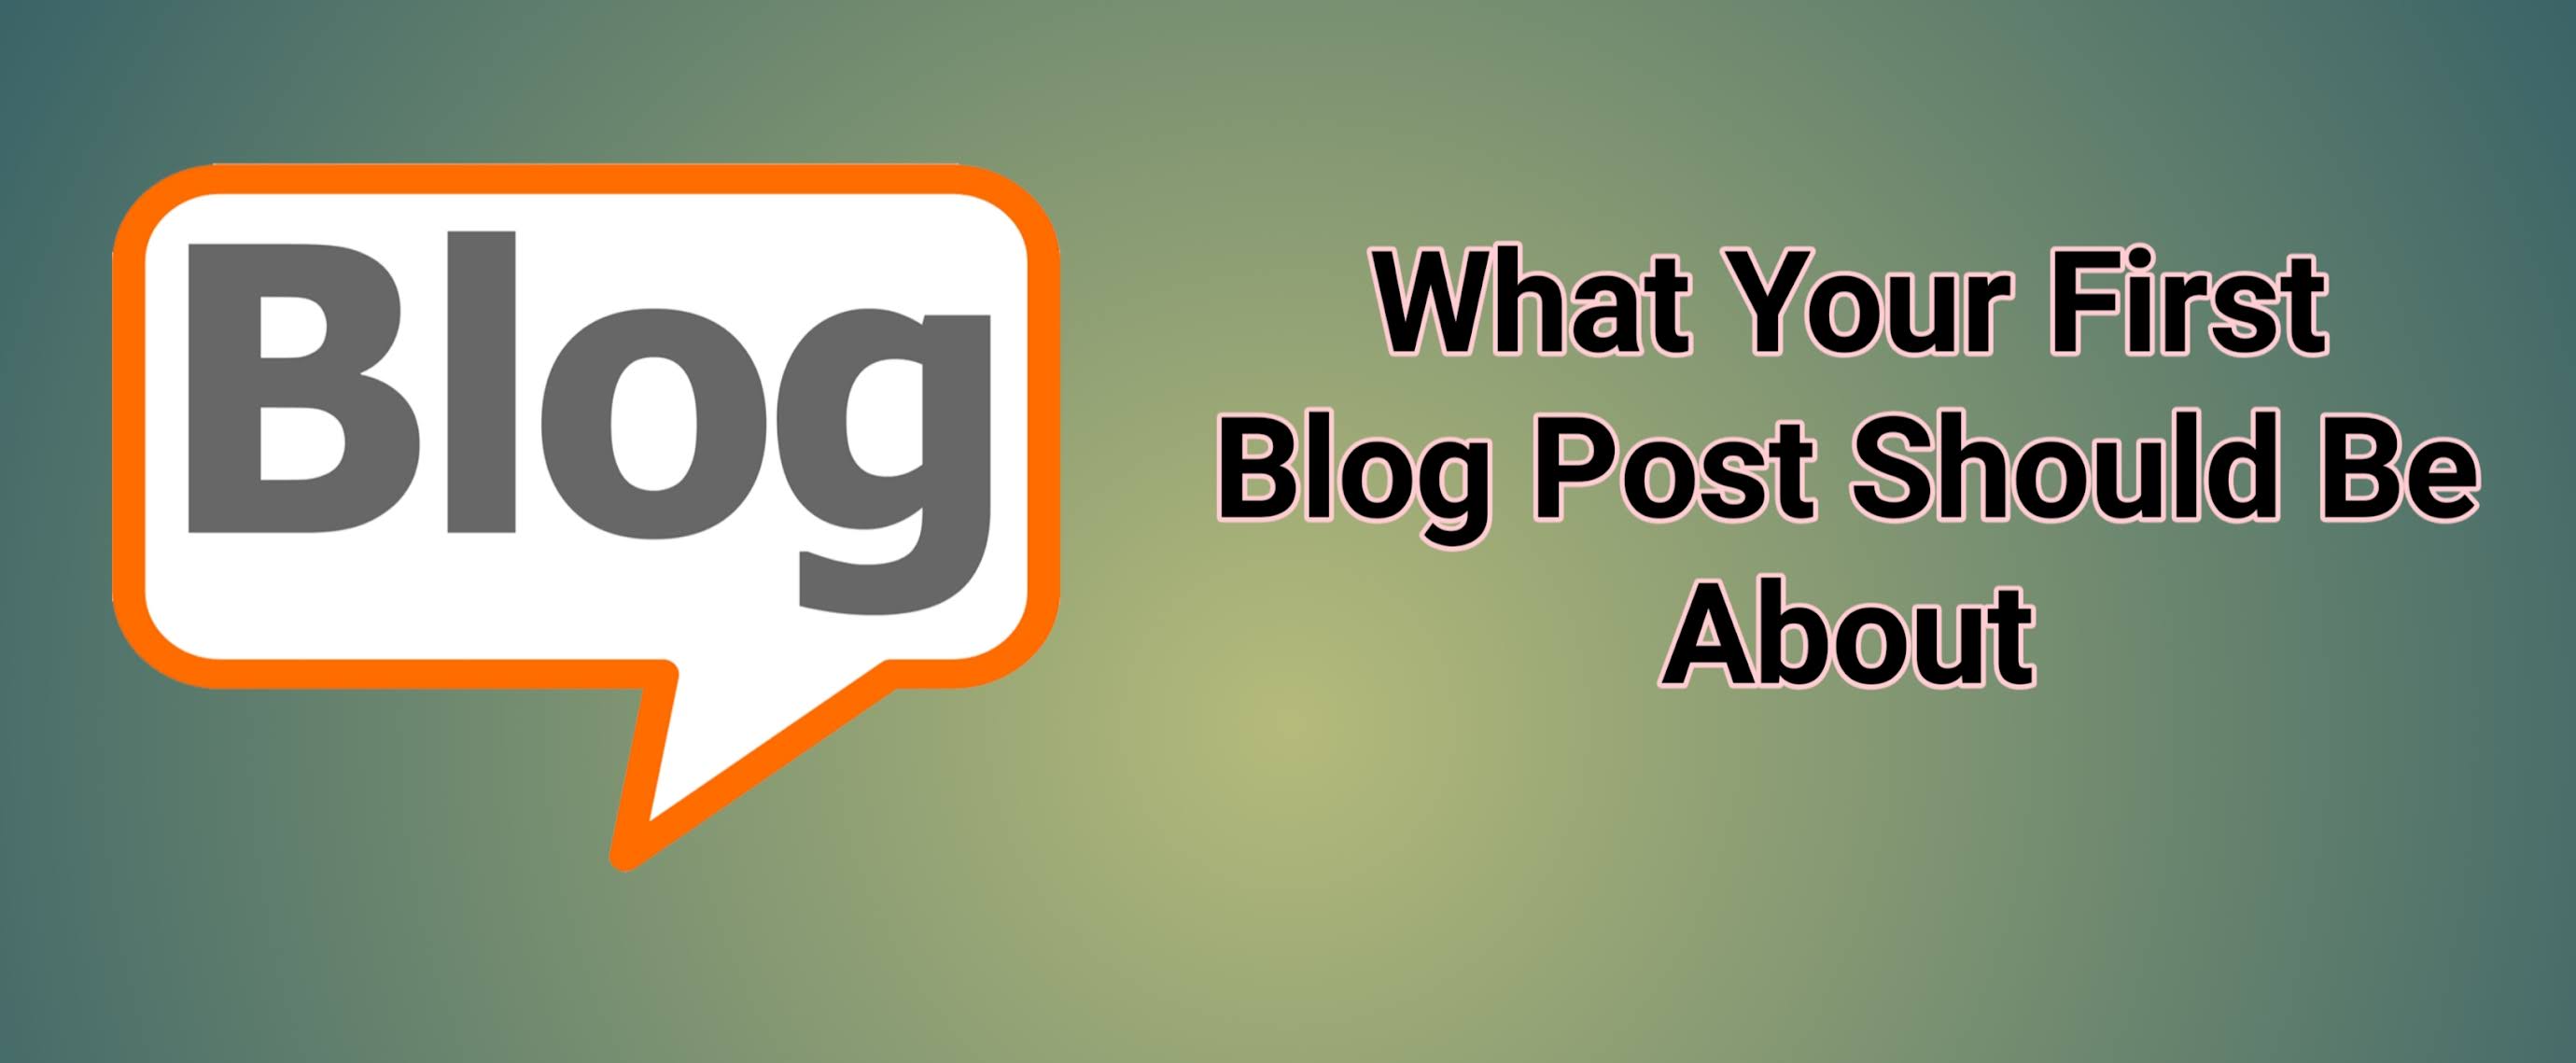 What Your First Blog Post Should Be About